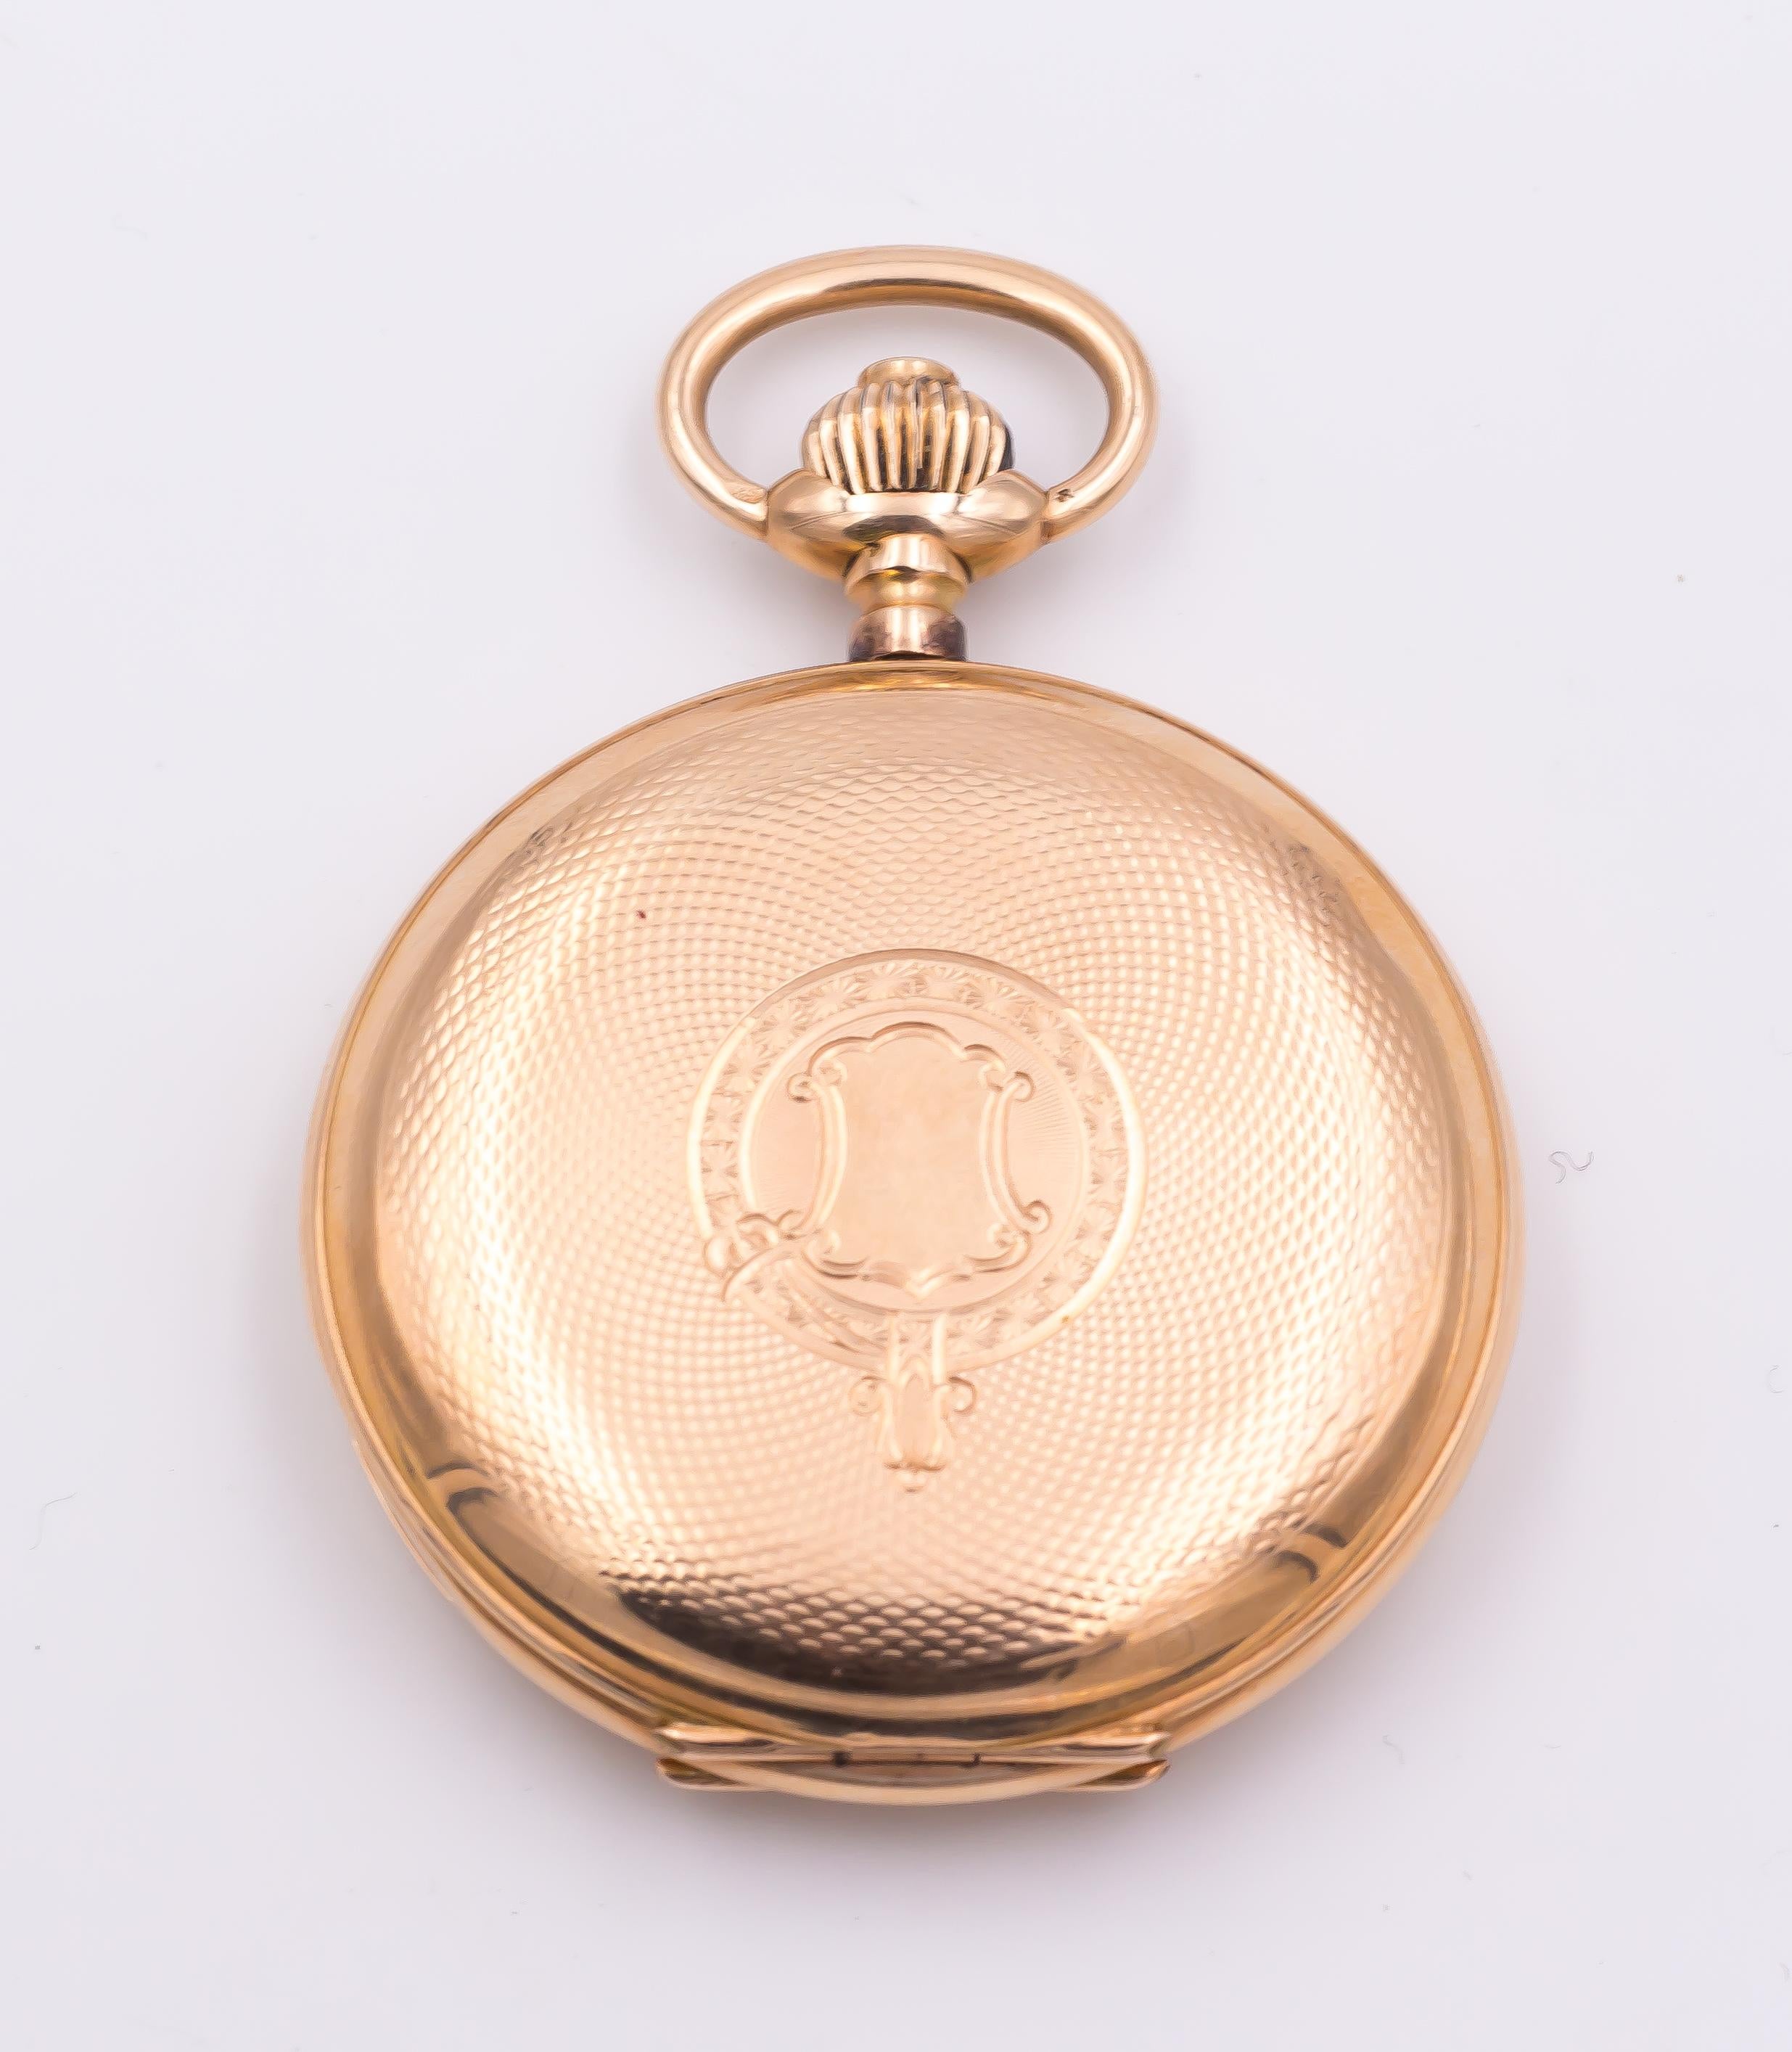 A very elegant antique gold pocket watch, dating from the late Nineteenth Century. 

MATERIALS
Yellow gold

MEASUREMENTS
Diameter: 49 mm